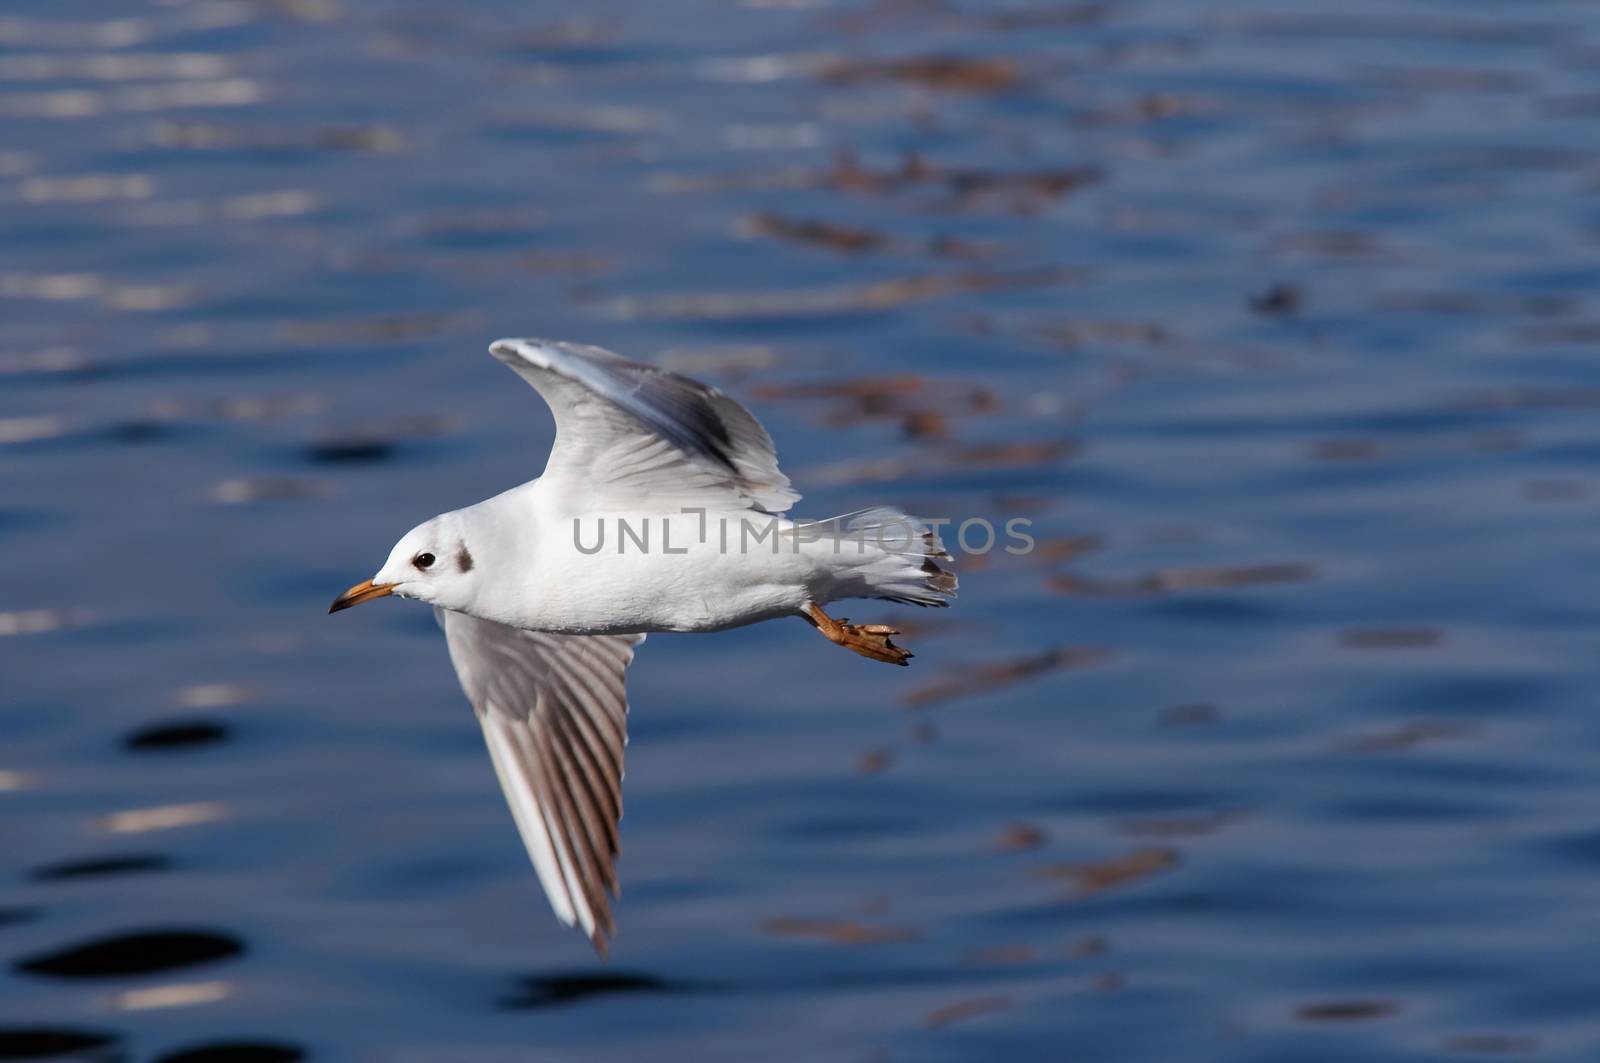 Image of the flying gull